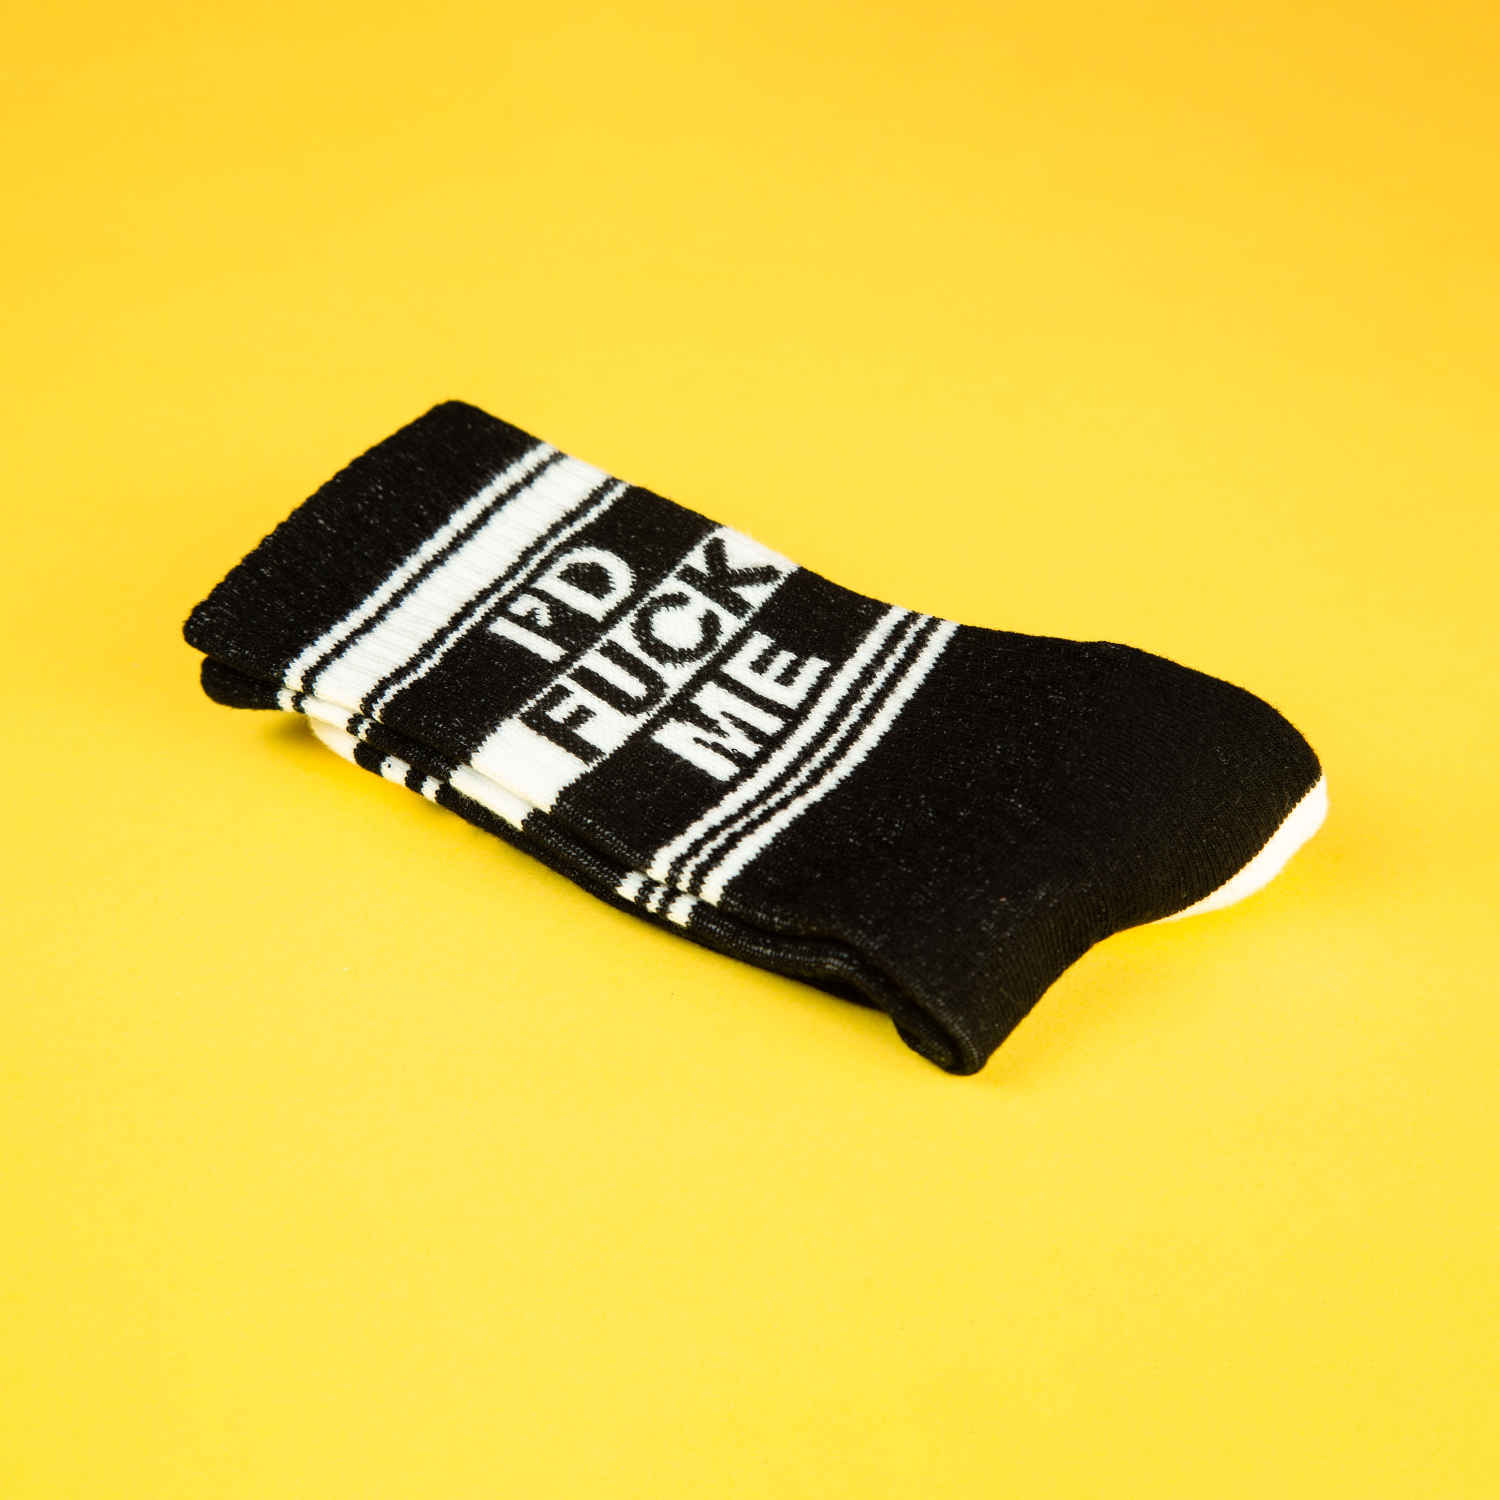 A folded pair of black and white crew socks that read "I'd fuck me."